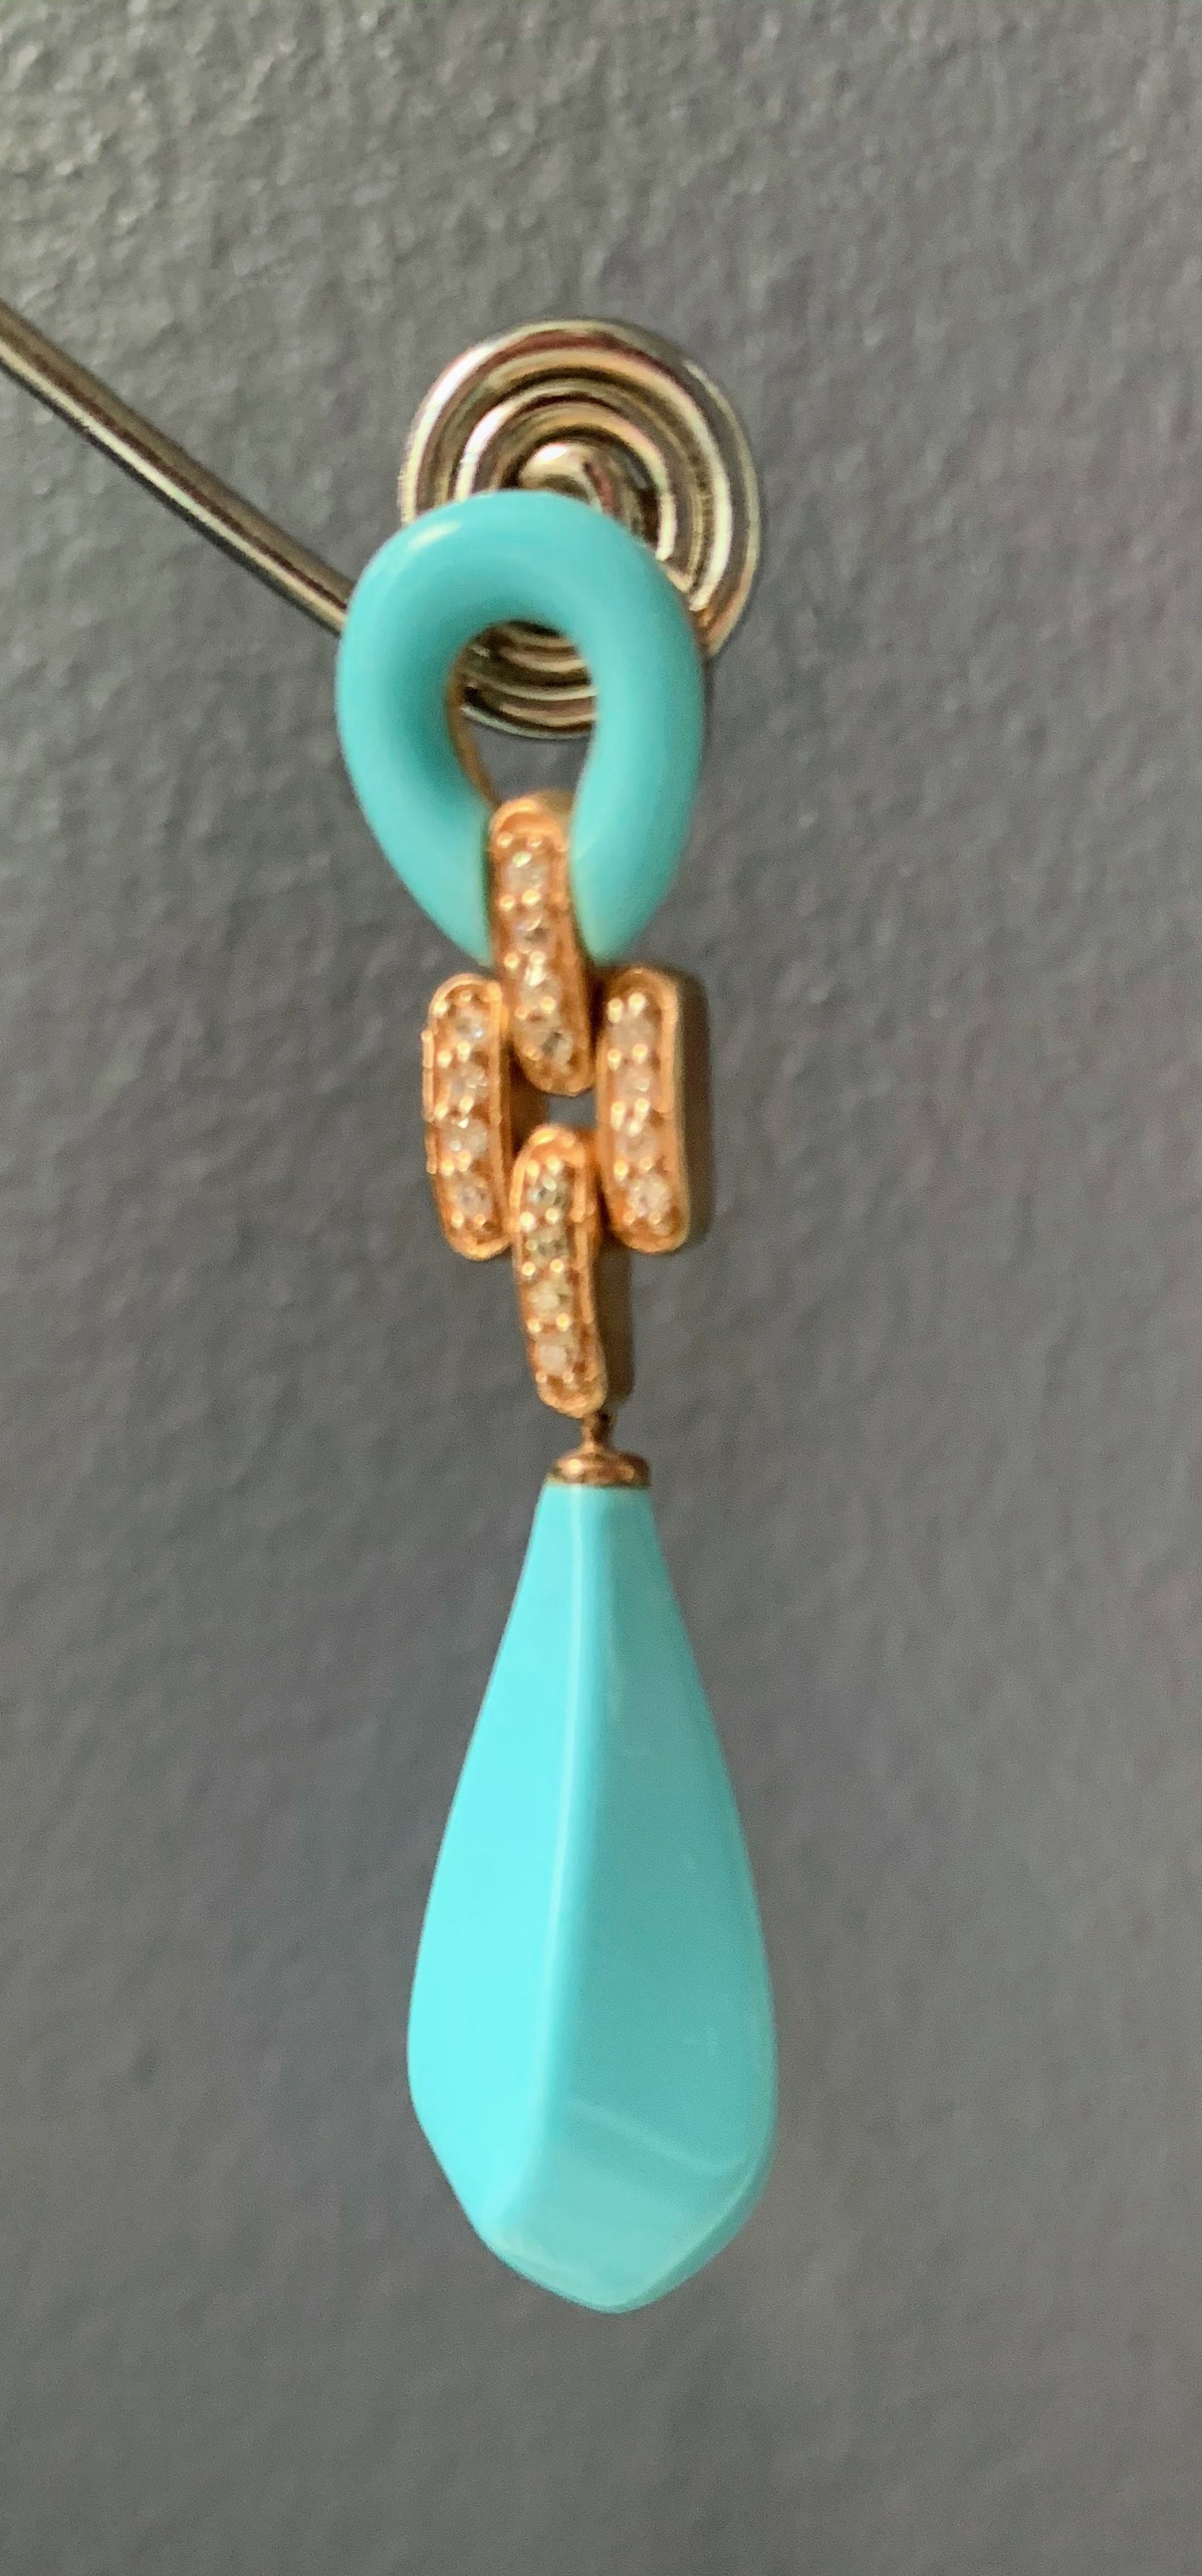 Turquoise gilt silver ear rings